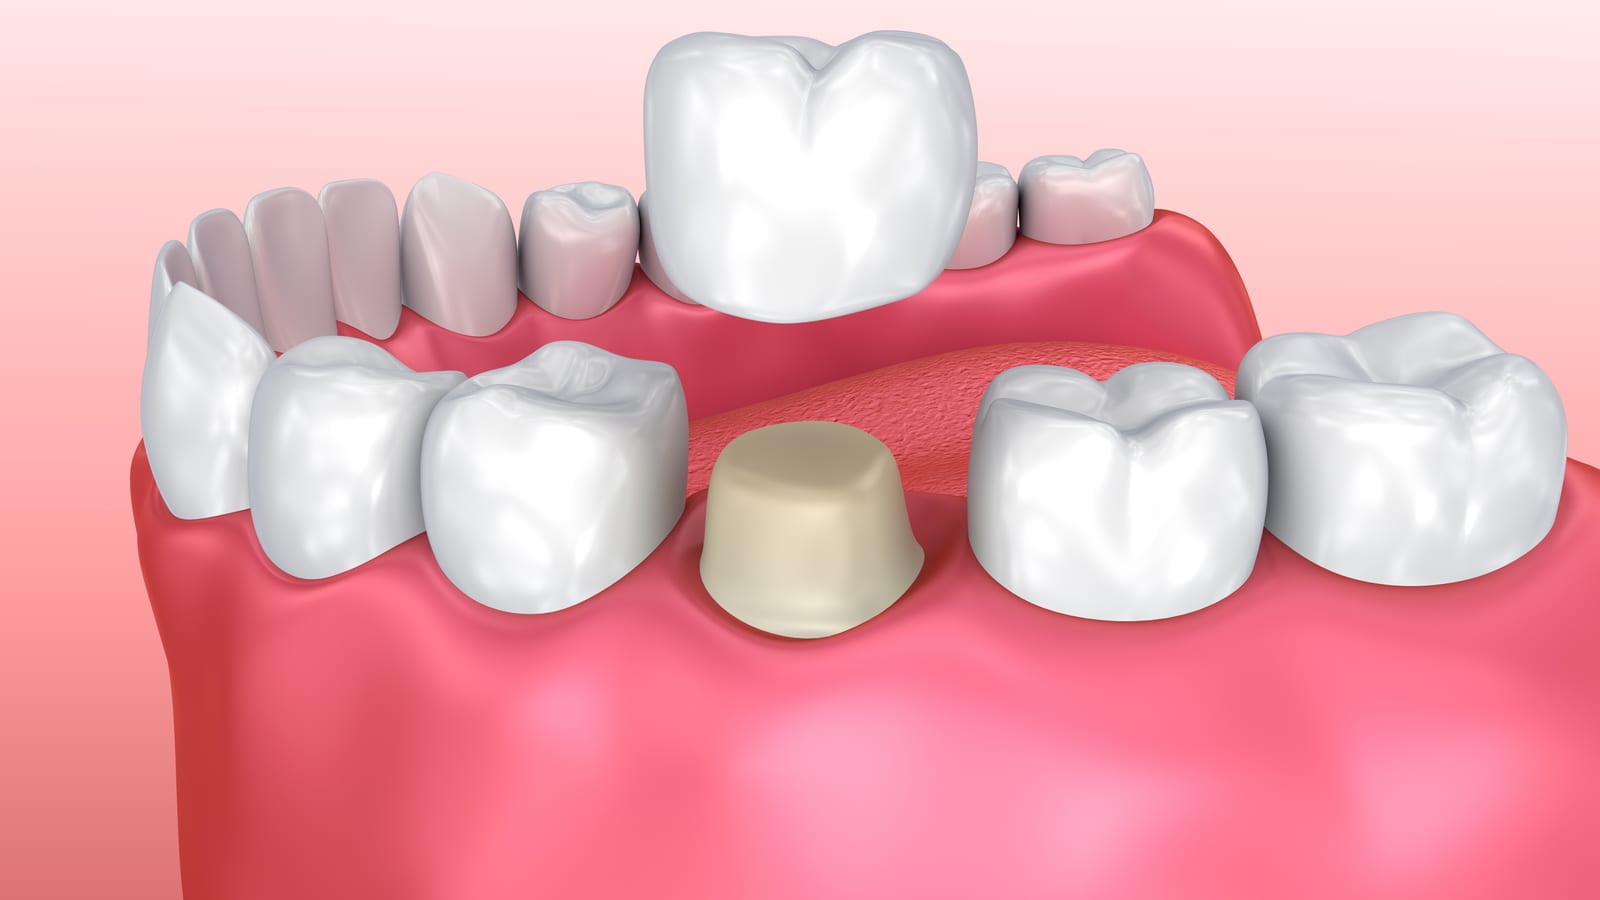 Rendering of a dental crown placement